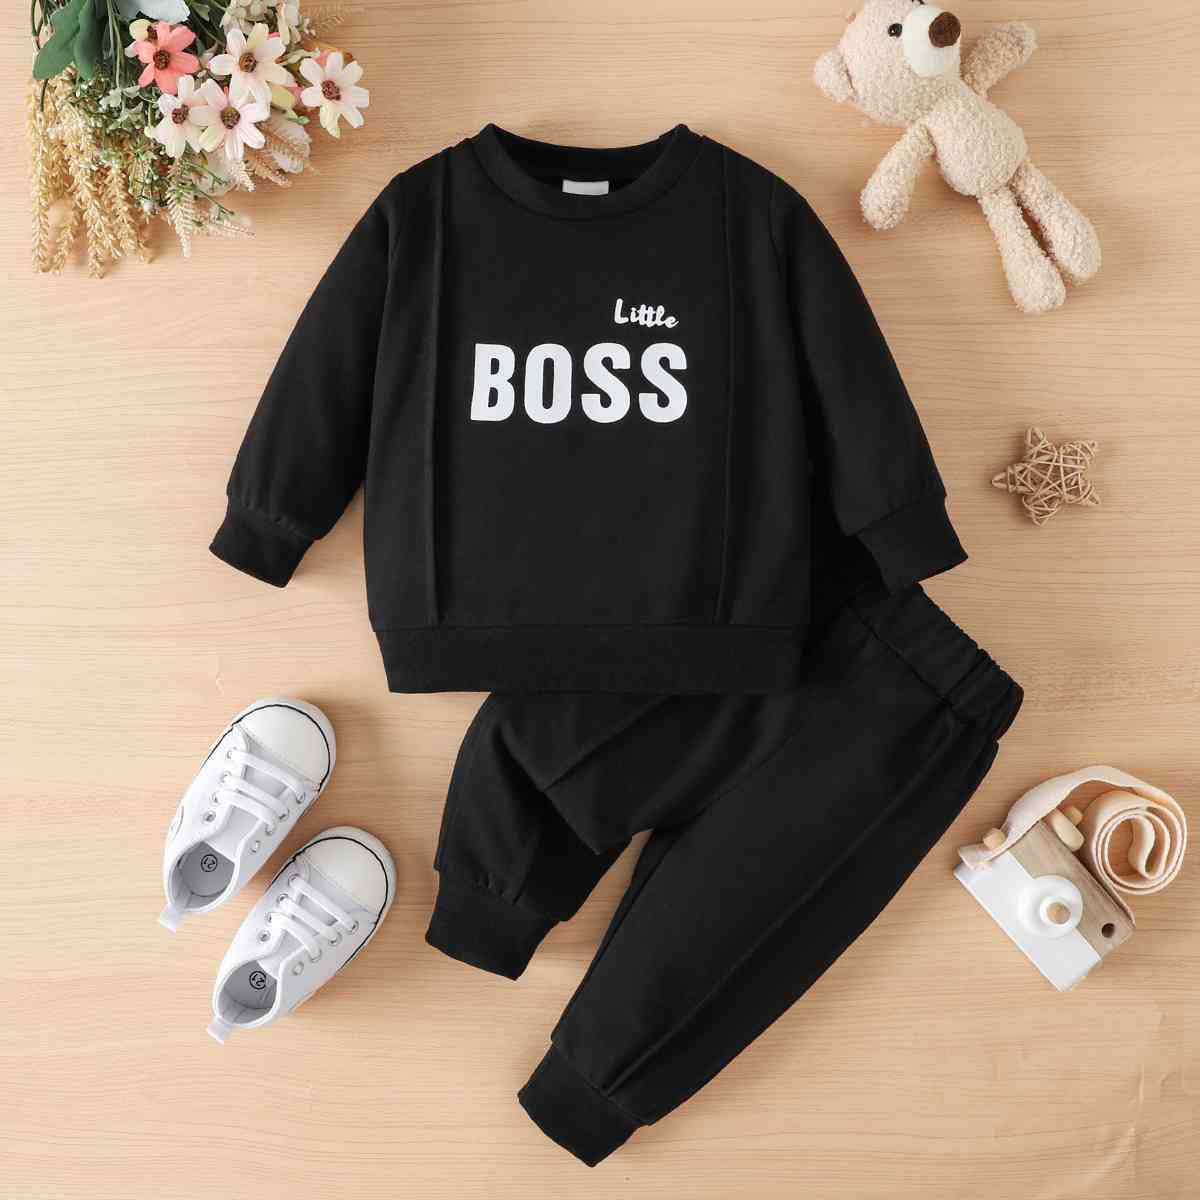 LITTLE BOSS Round Neck Long Sleeve Tee and Pants Set Black